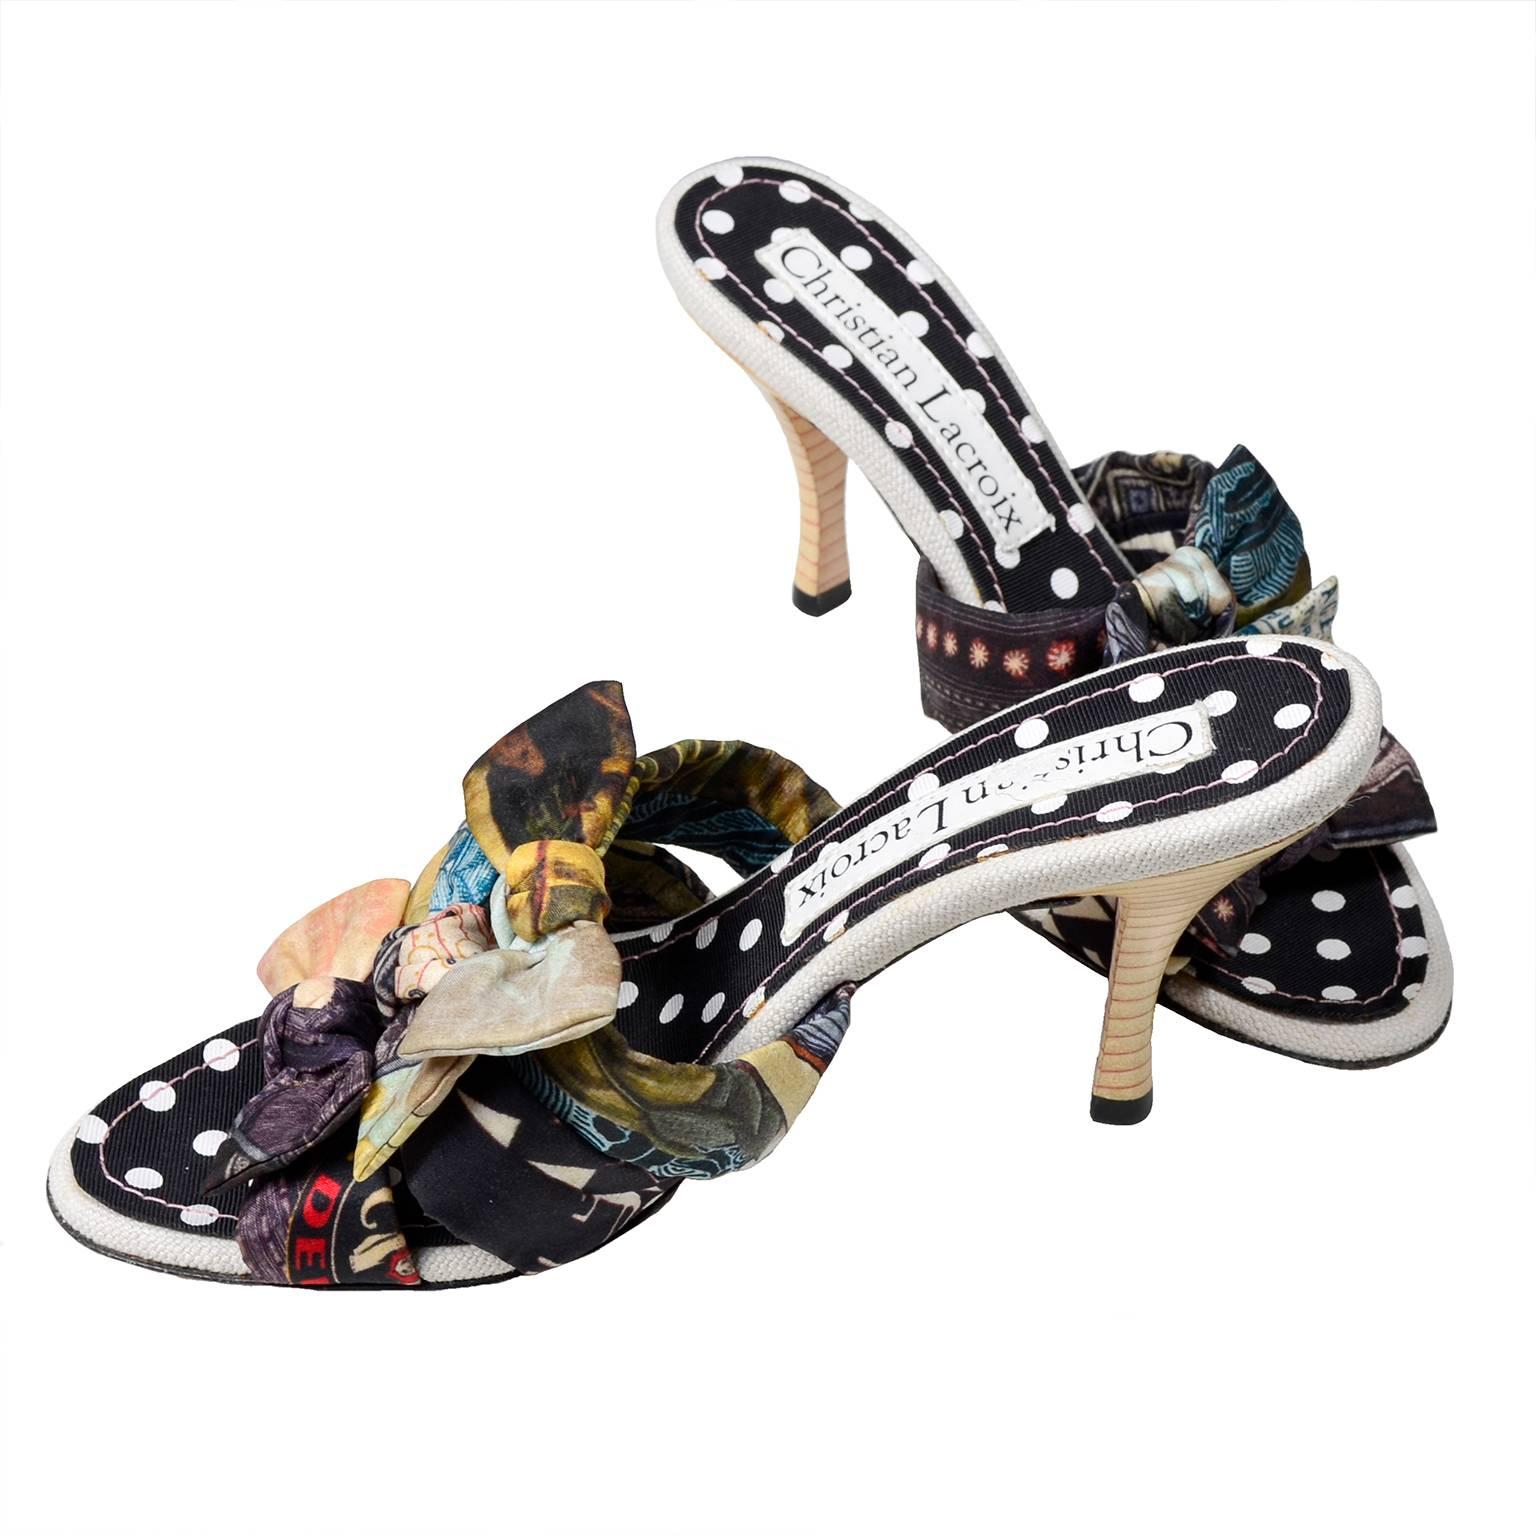 These are fabulous Christian Lacroix sandals with 3 and 1/2 inch, polka dot inner soles and 3 patterned bows.  These vintage shoes are 3 inches at the widest part of the outside of the sole and are labeled a size 35.5. These appear to have been